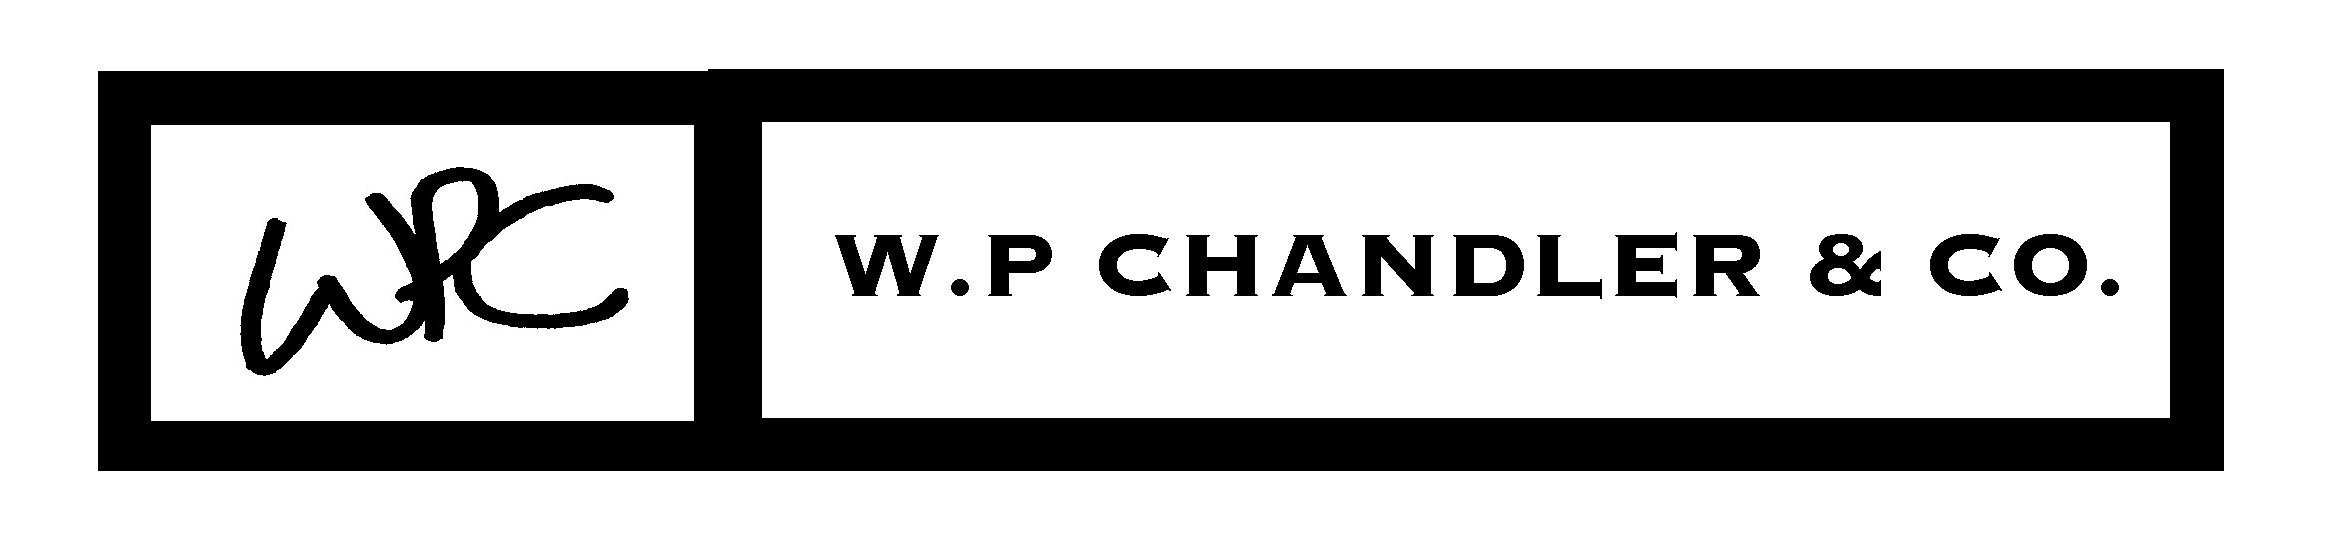 W.P Chandler & Co